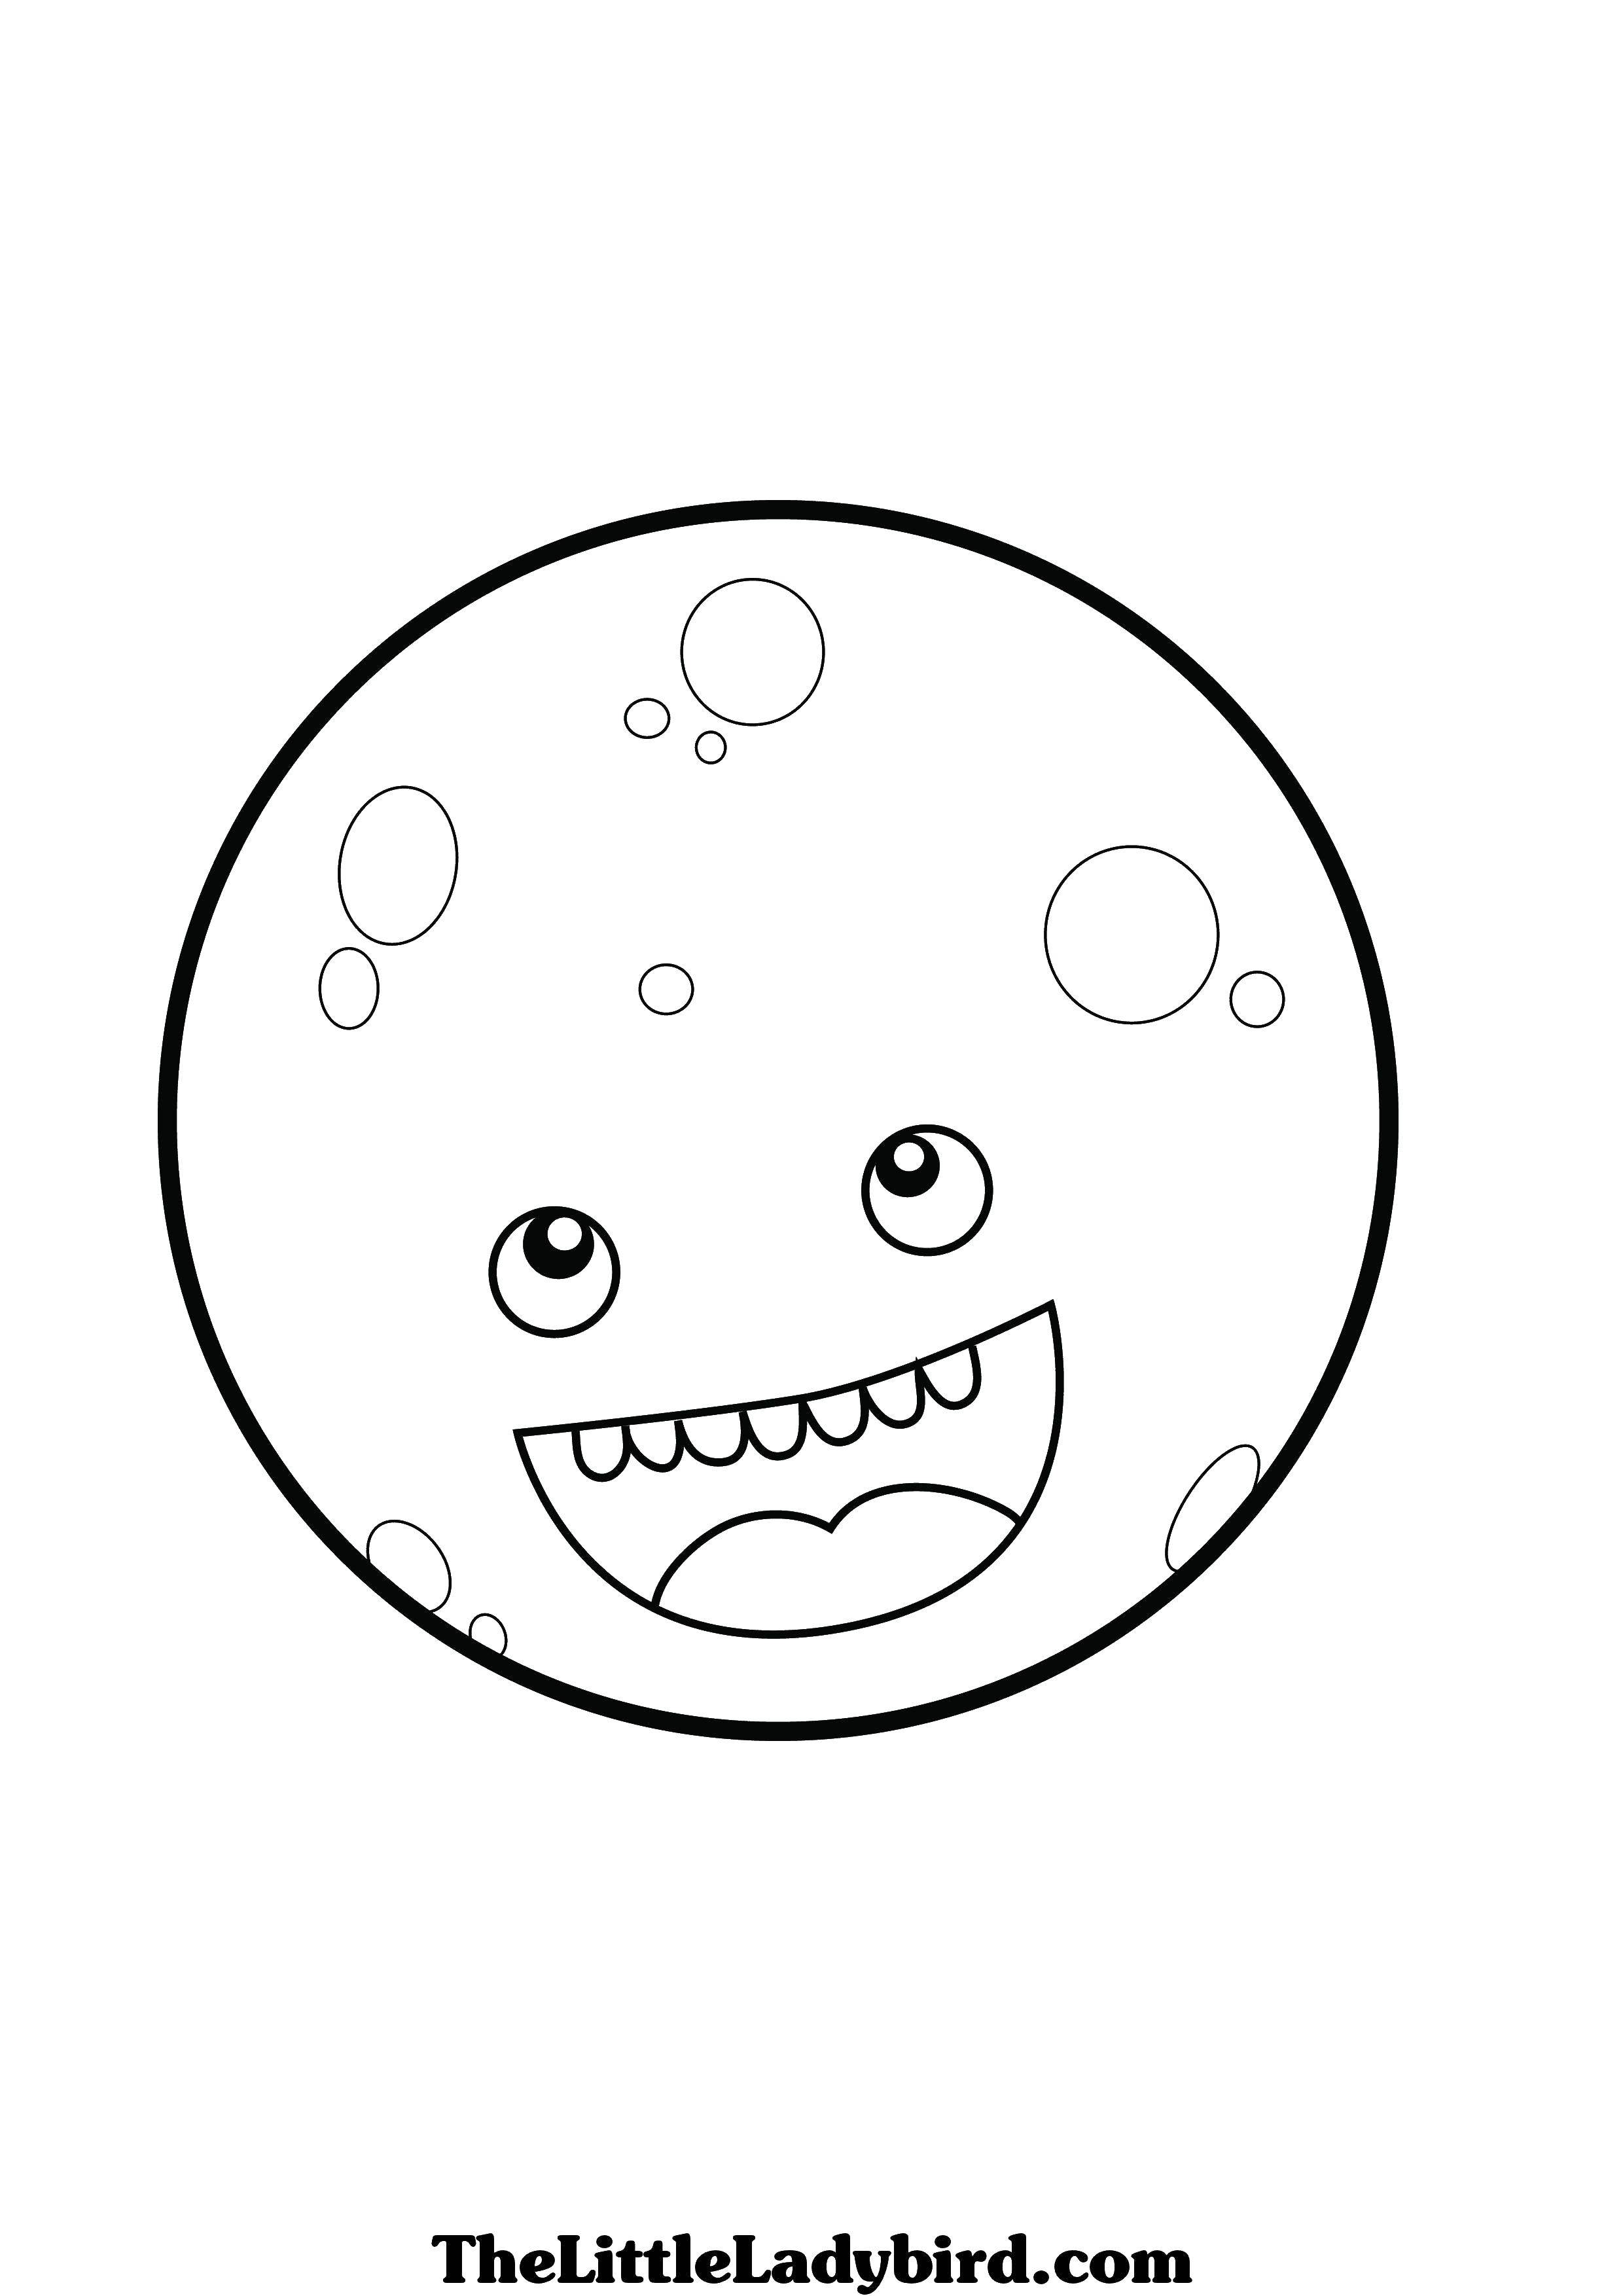 Coloring The moon is very happy. Category moon. Tags:  happiness.